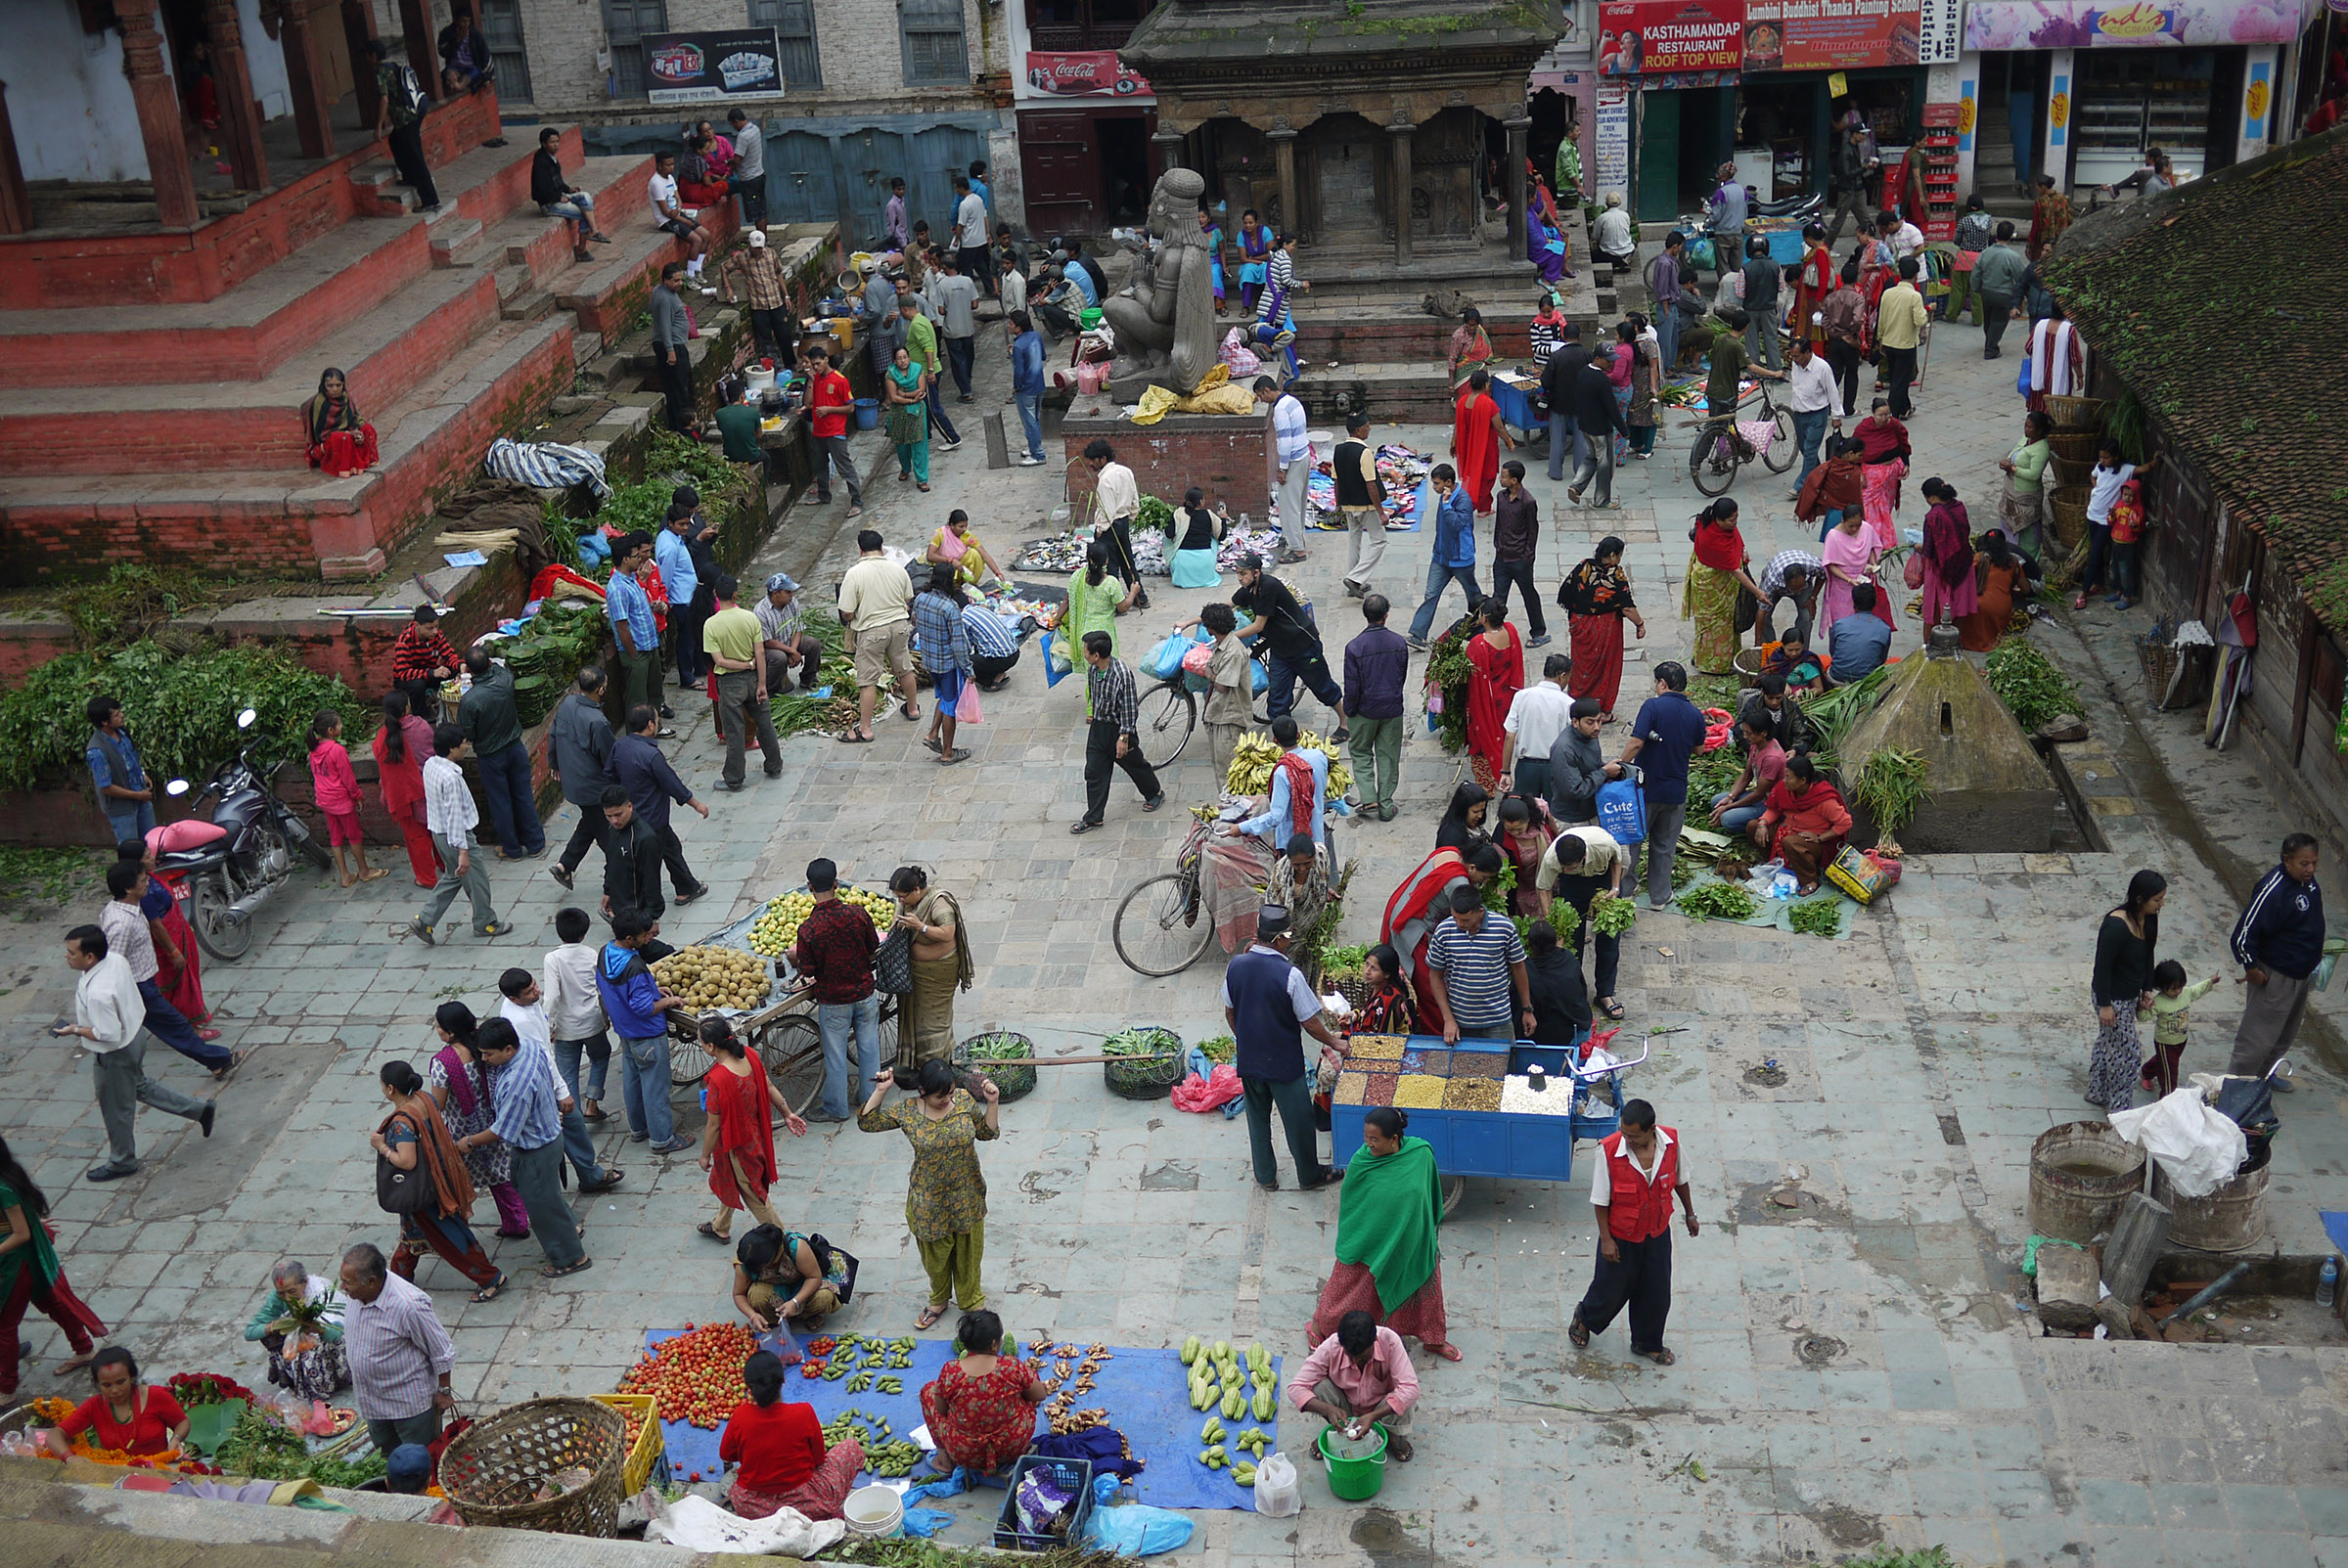 A top-down view of a large market filled with people walking between blankets spread with produce and other goods.